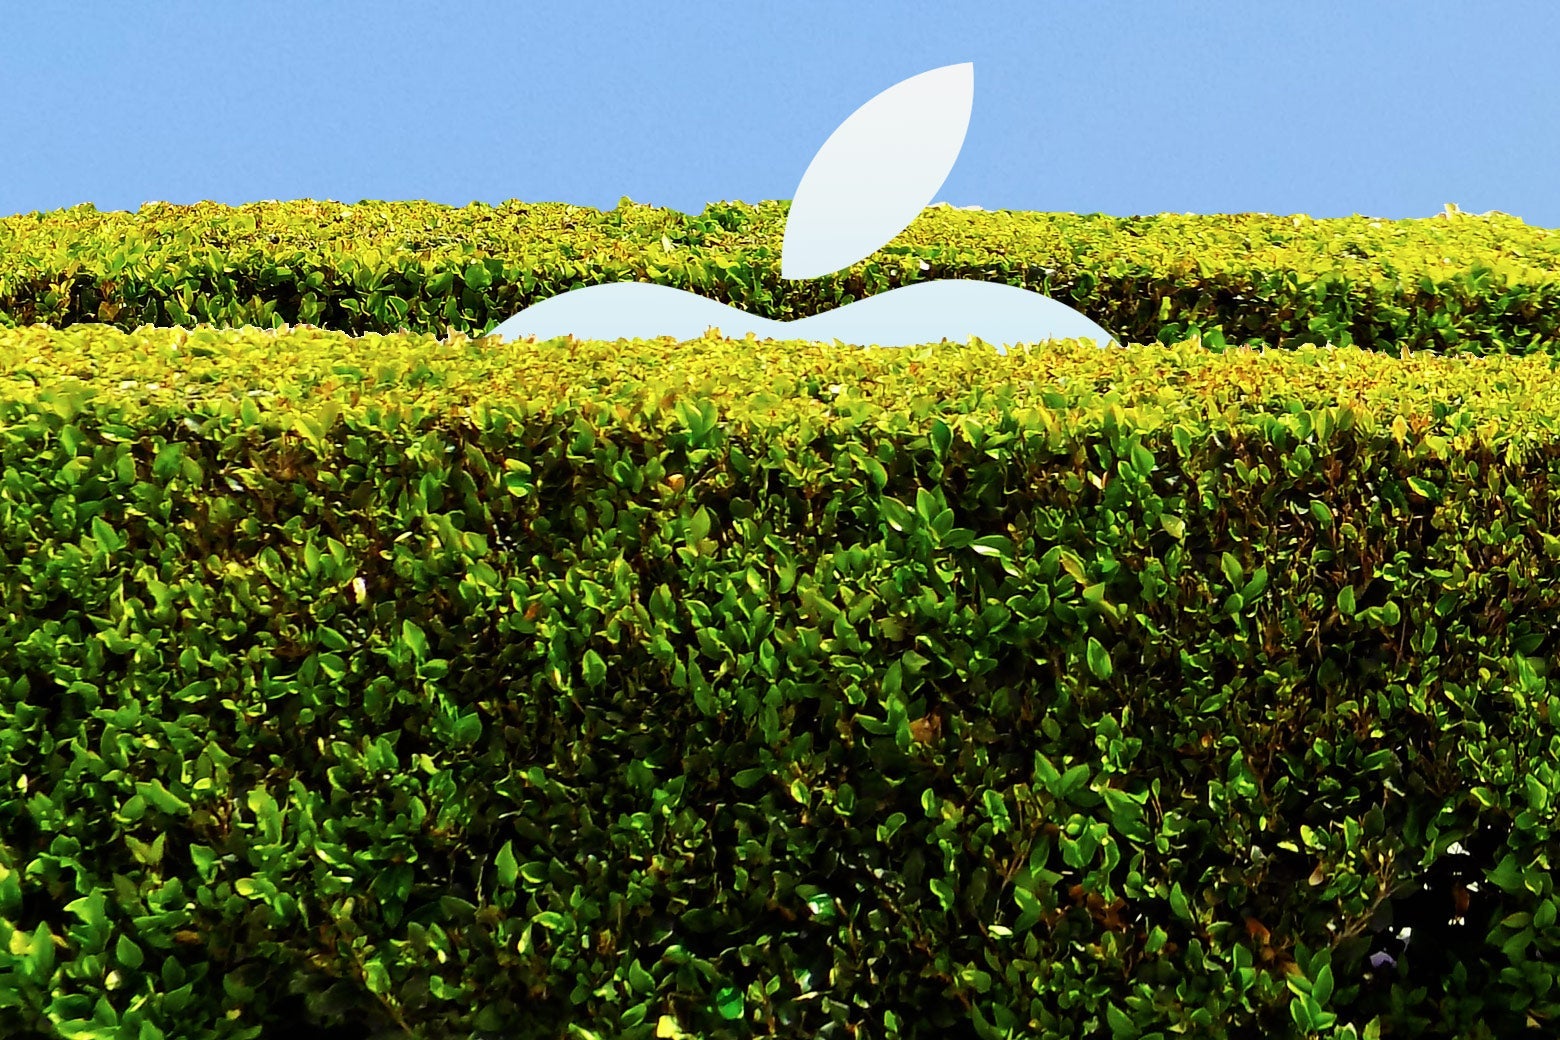 An Apple logo peering from behind a tall hedge—a walled garden.